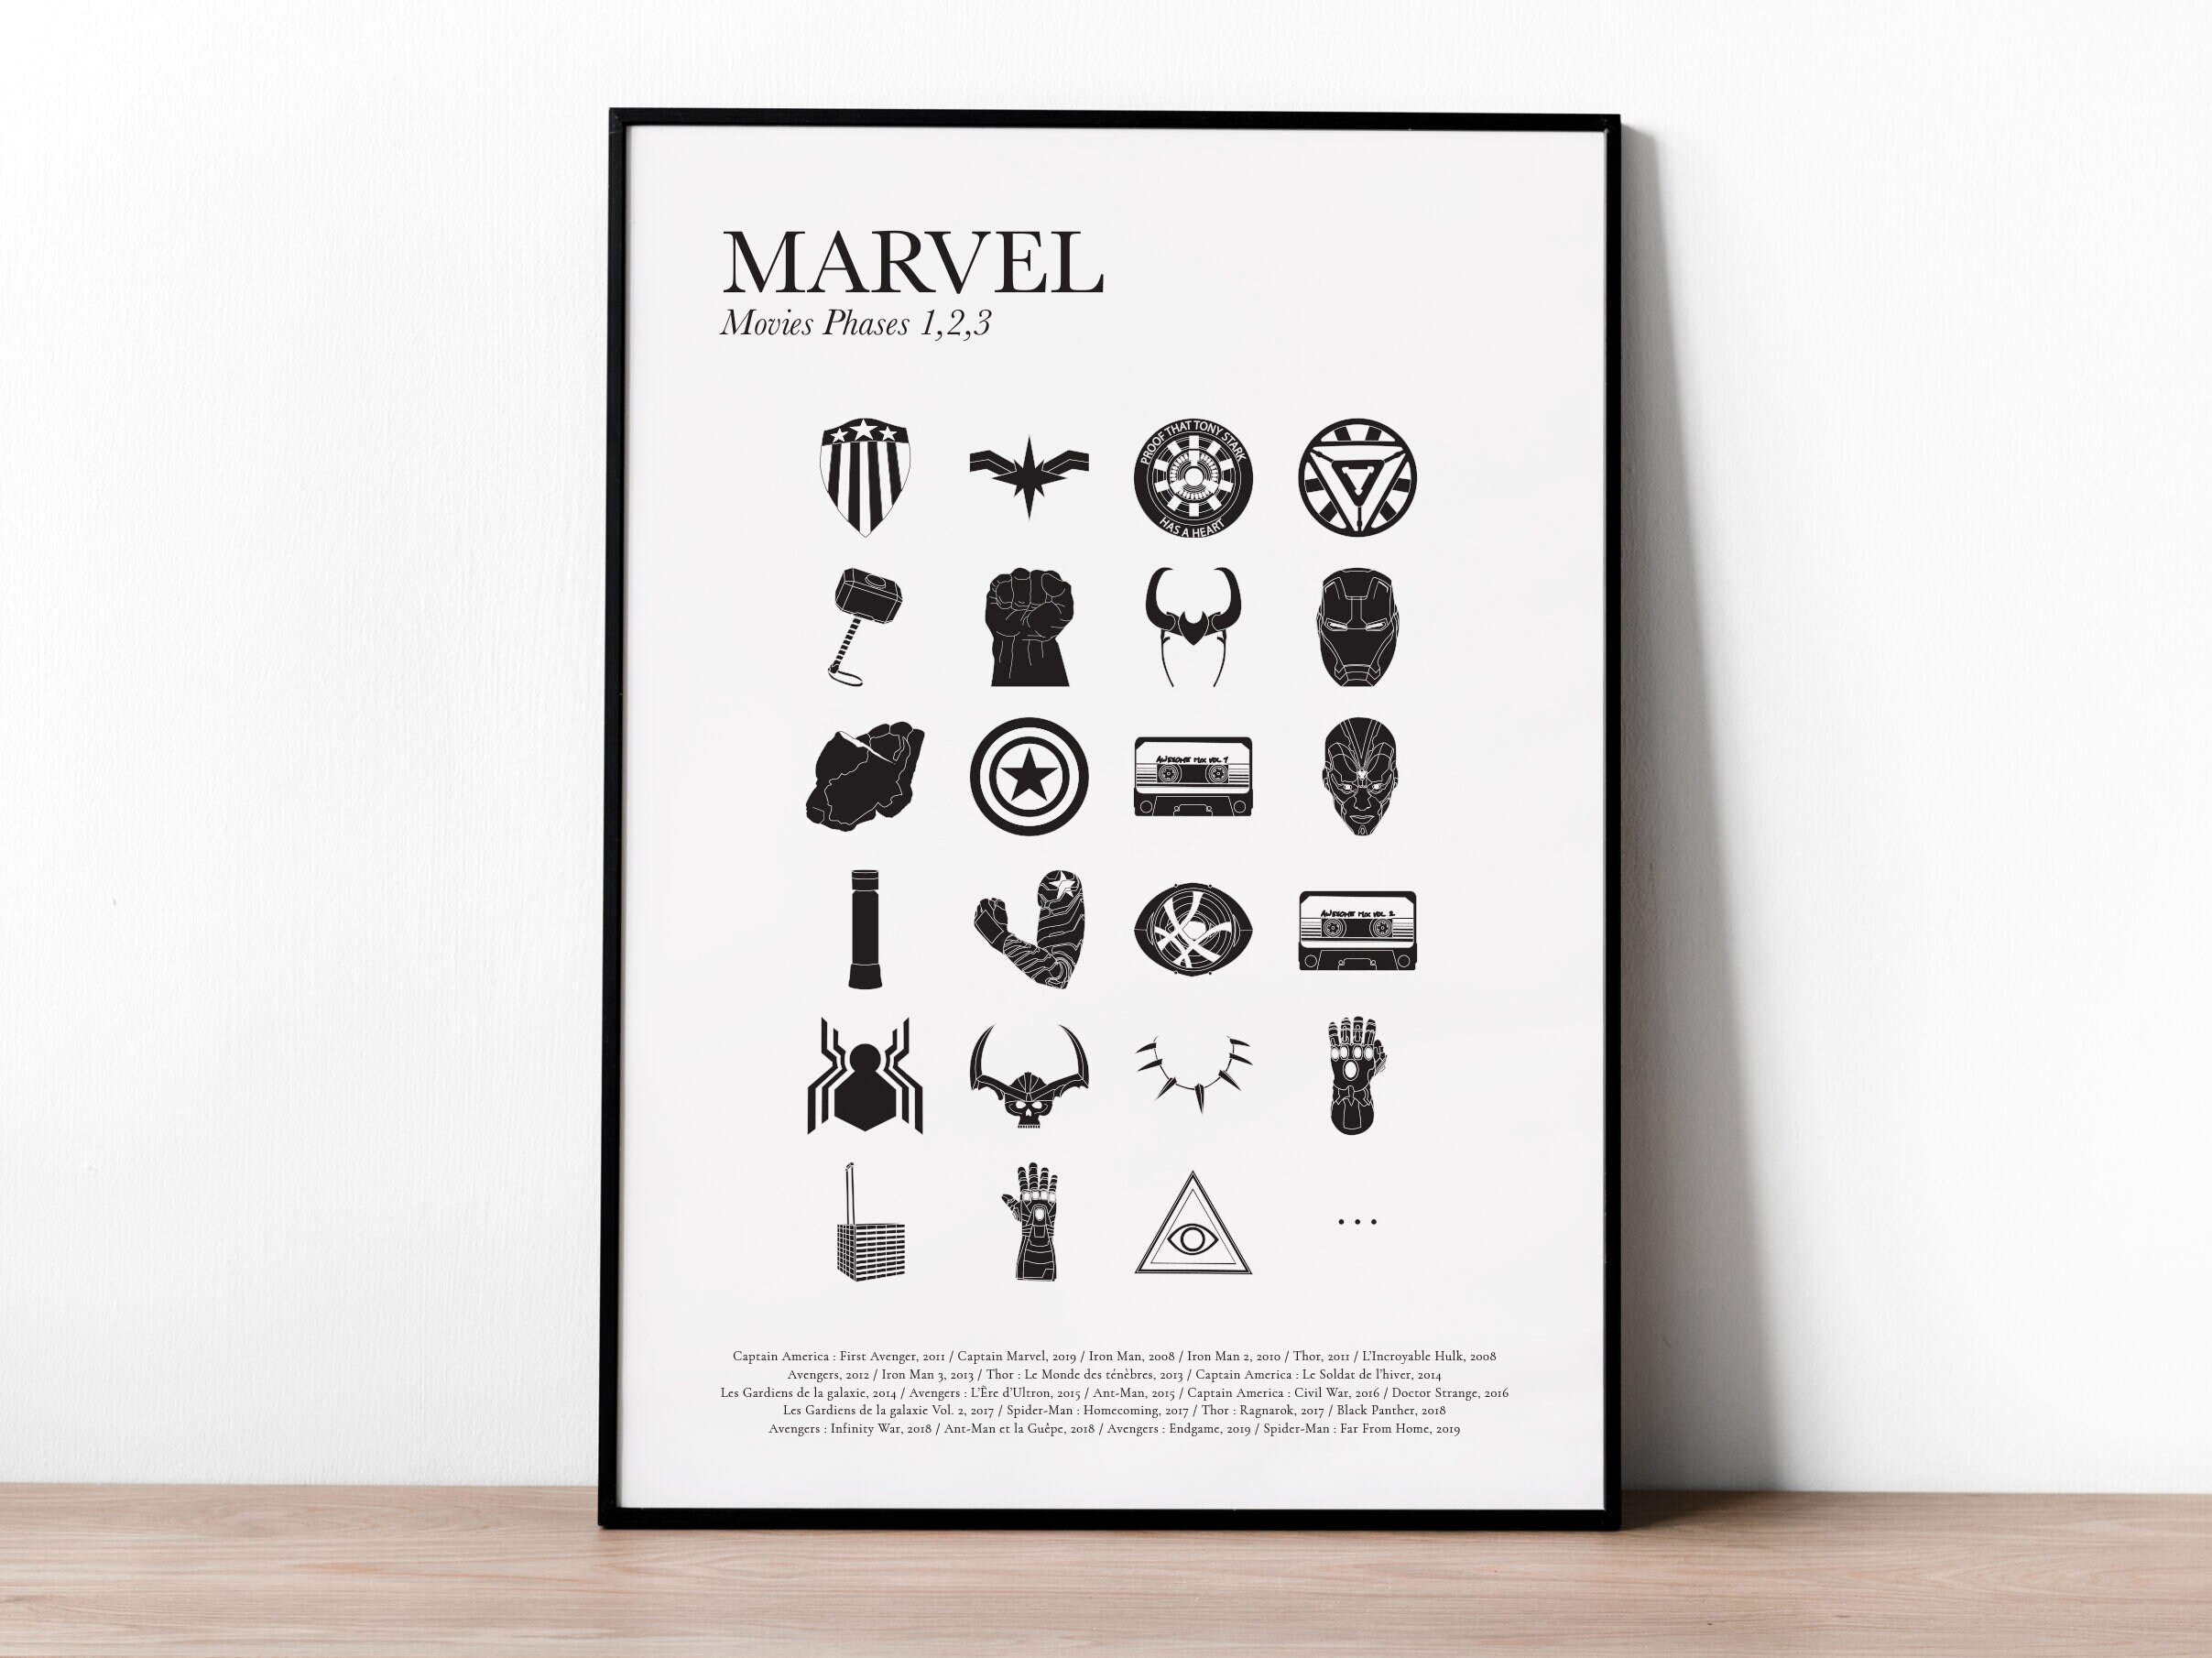 MARVEL Poster Minimalist Poster White and Beige Background